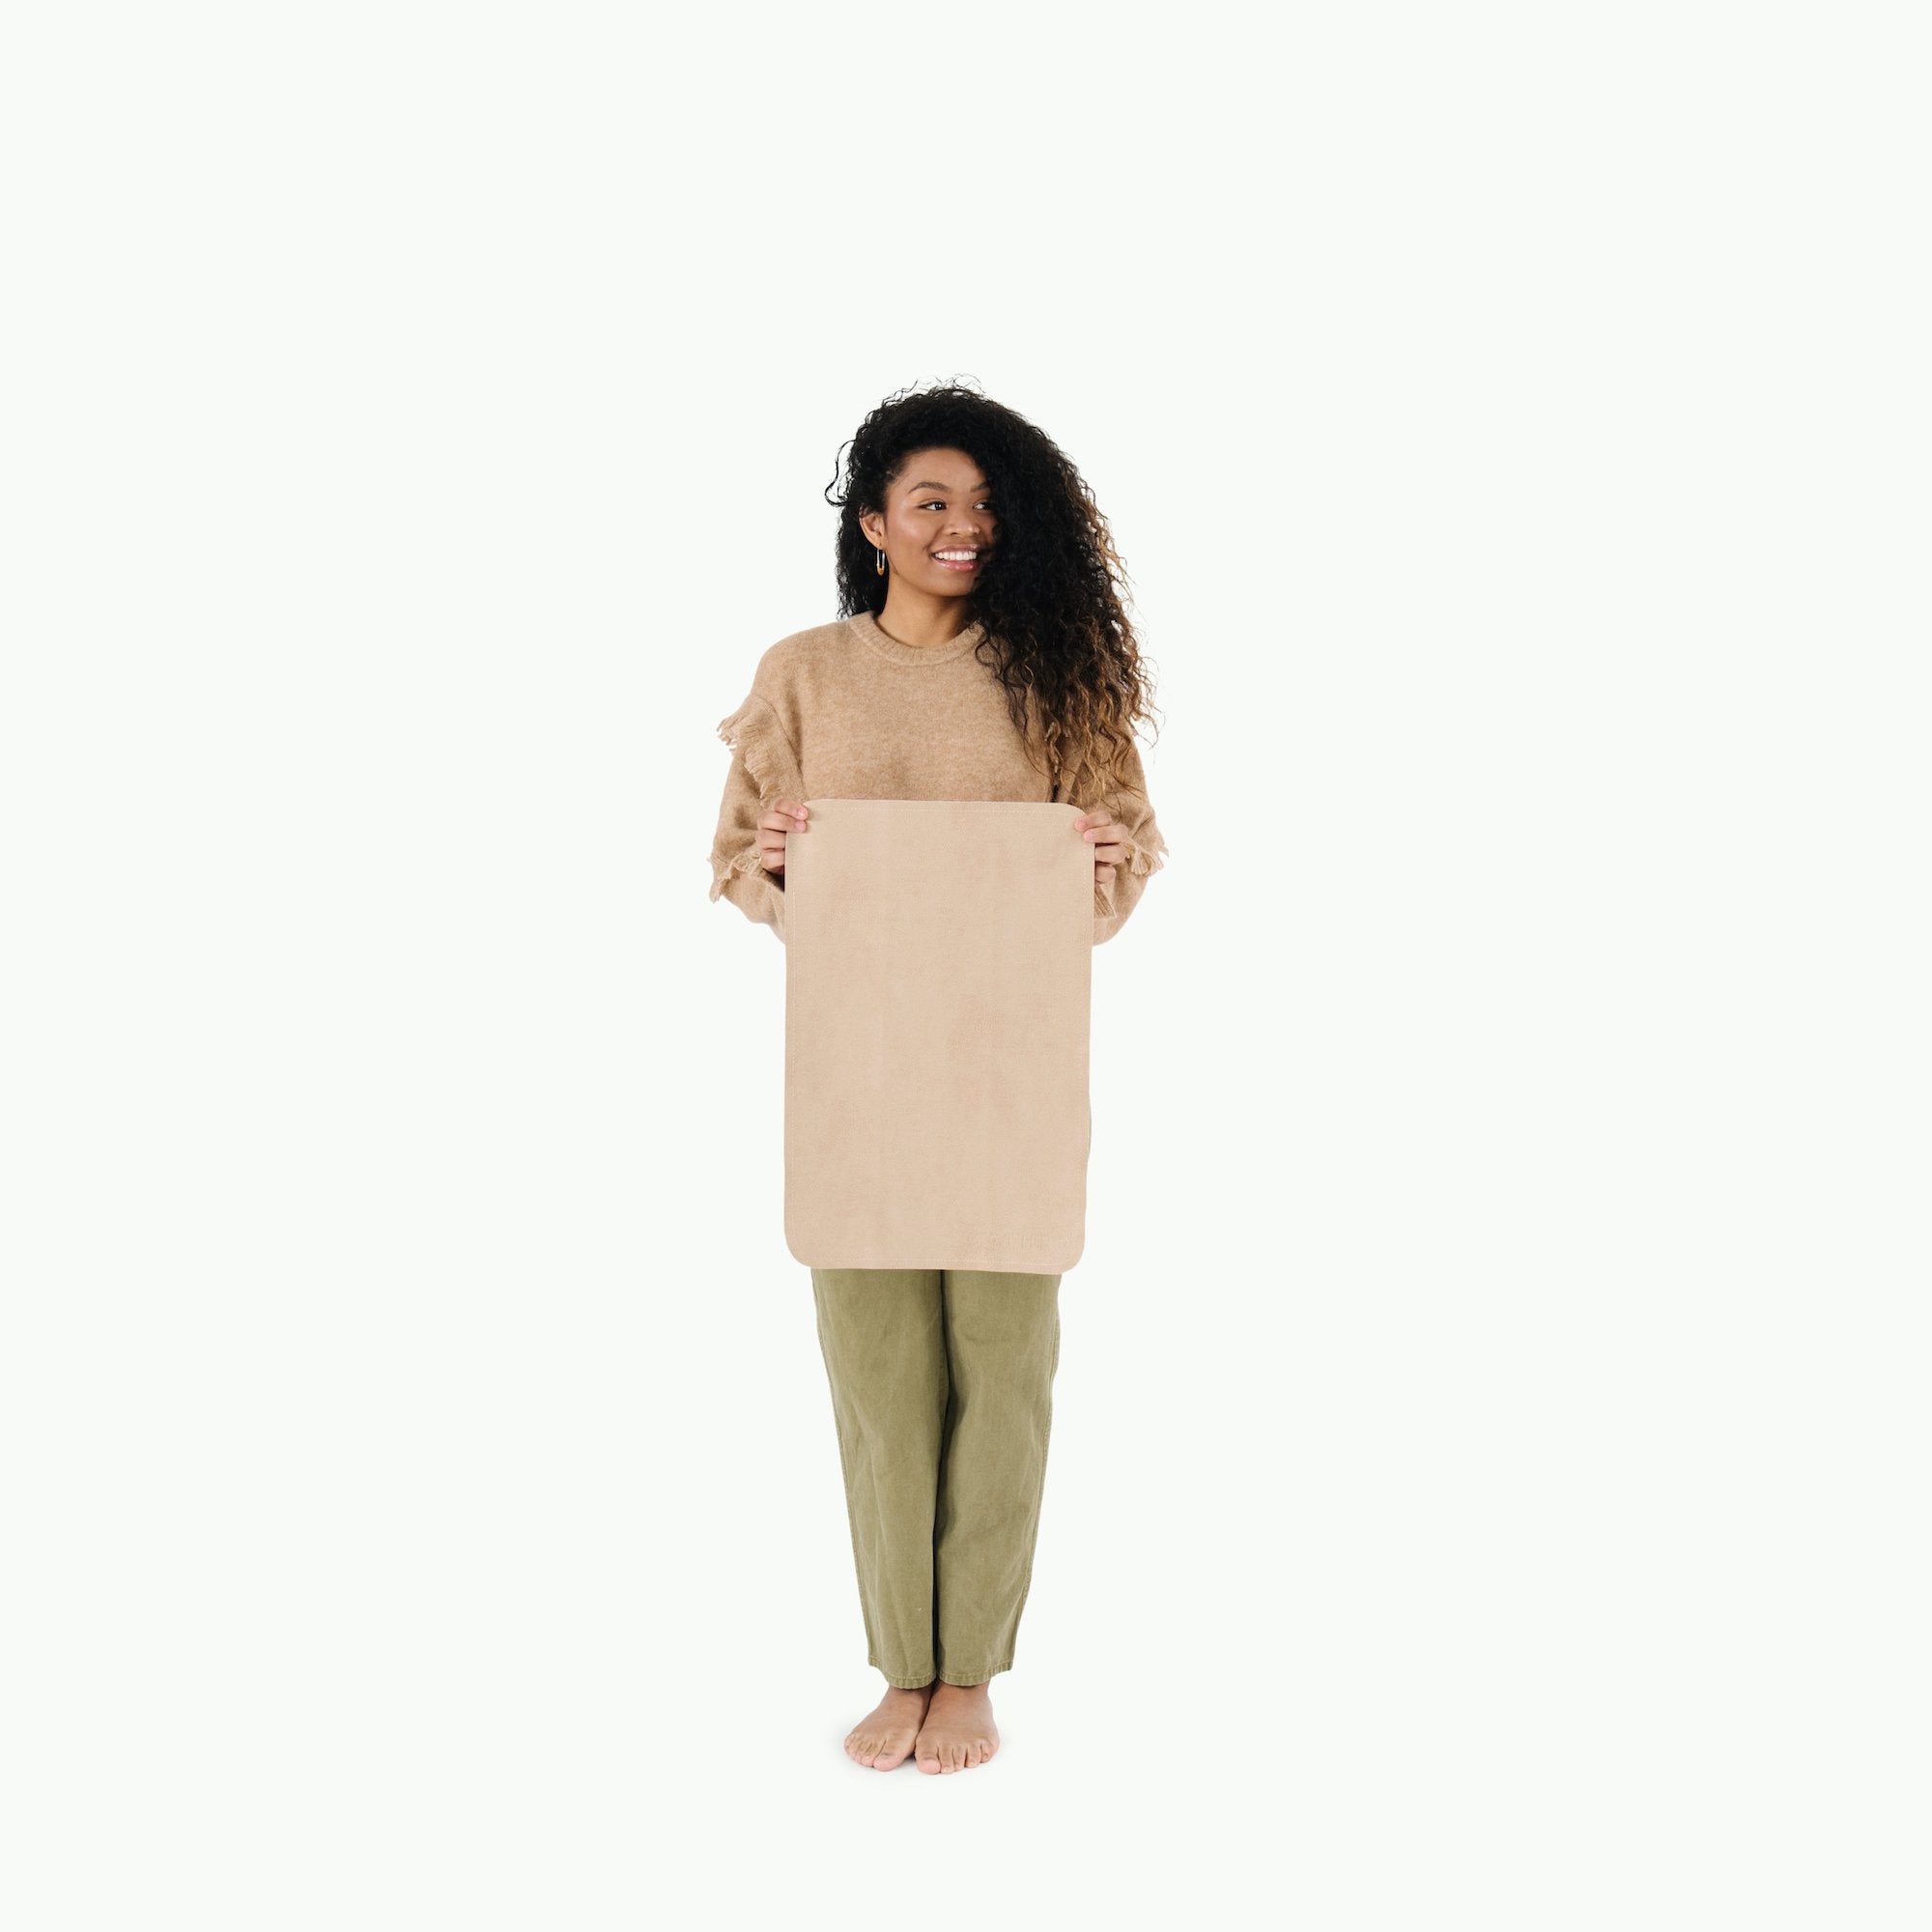 Untanned (on sale)@Woman holding the Untanned Micro mat